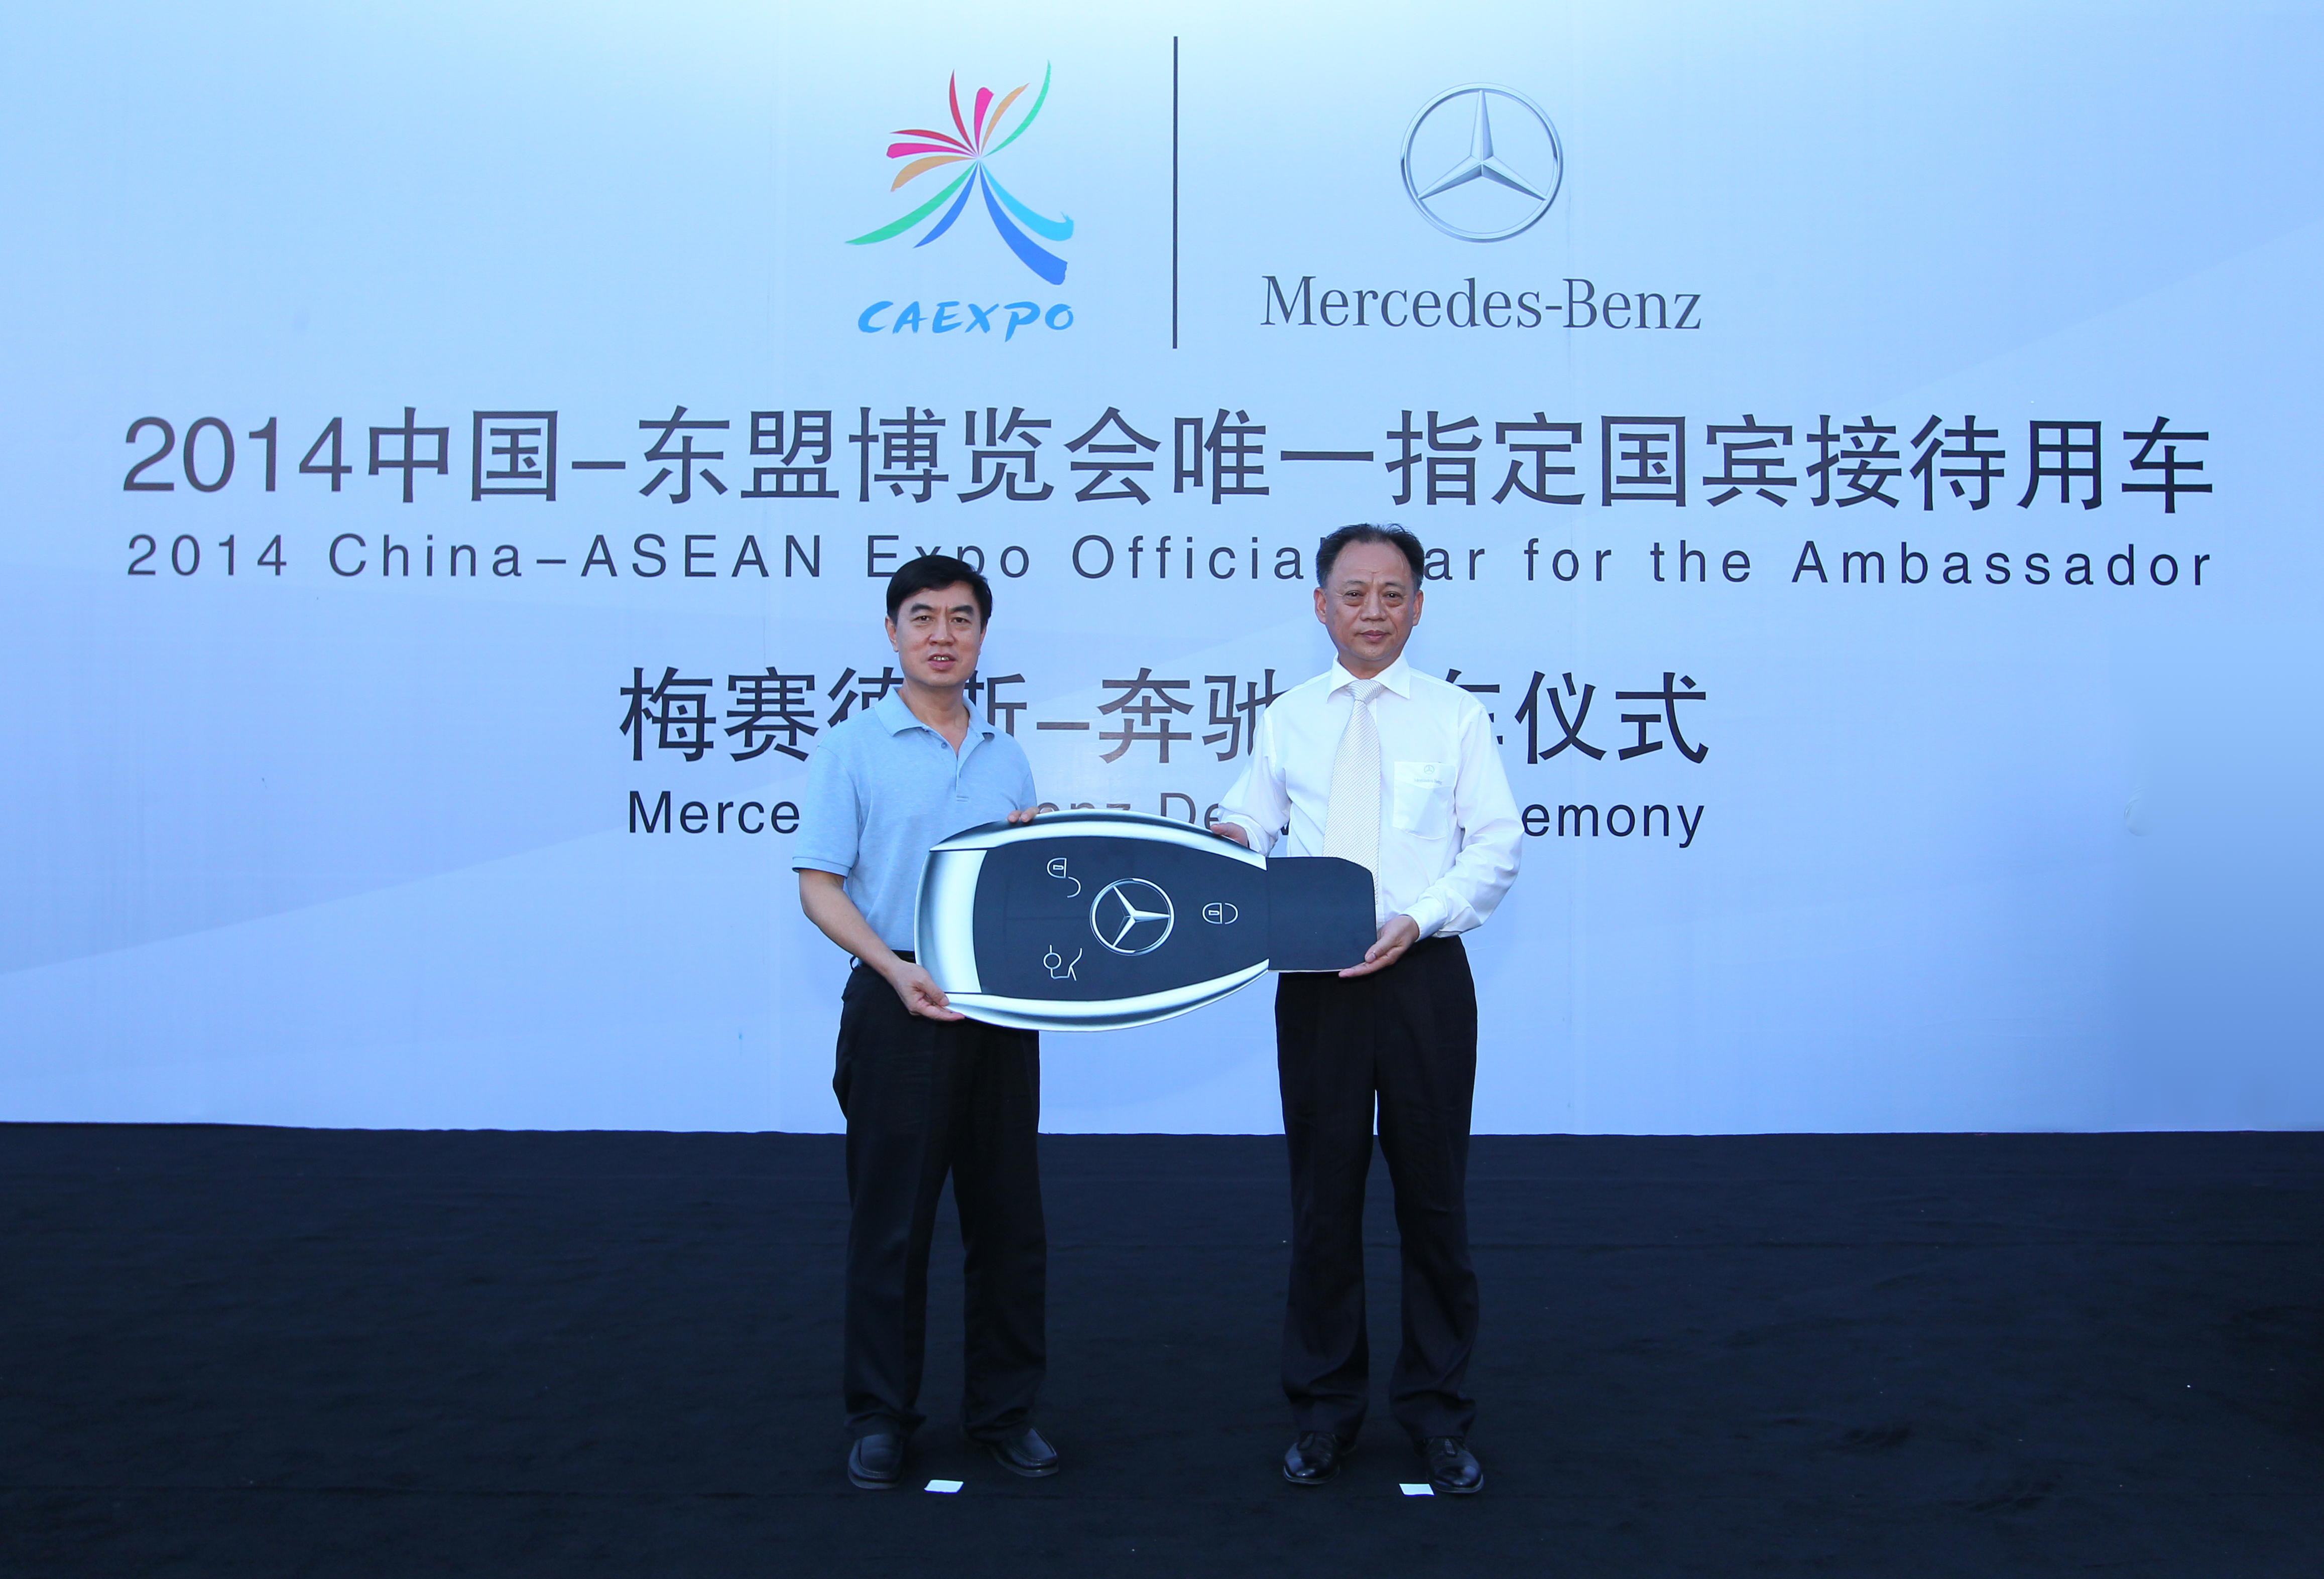 Official Car for the Ambassodor Mercedes-Benz Delivery Ceremony